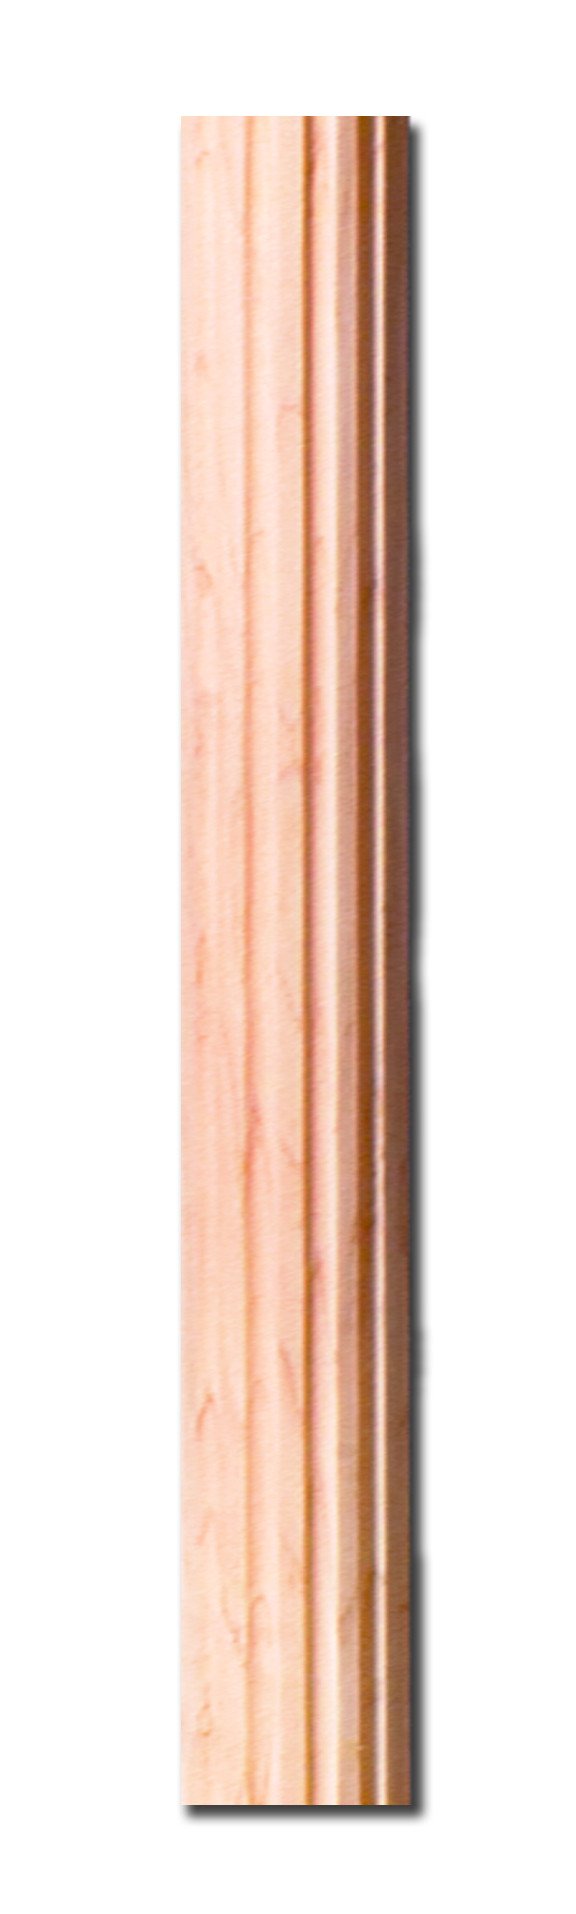 Castlewood W-T1573 Fluted Onlay Column